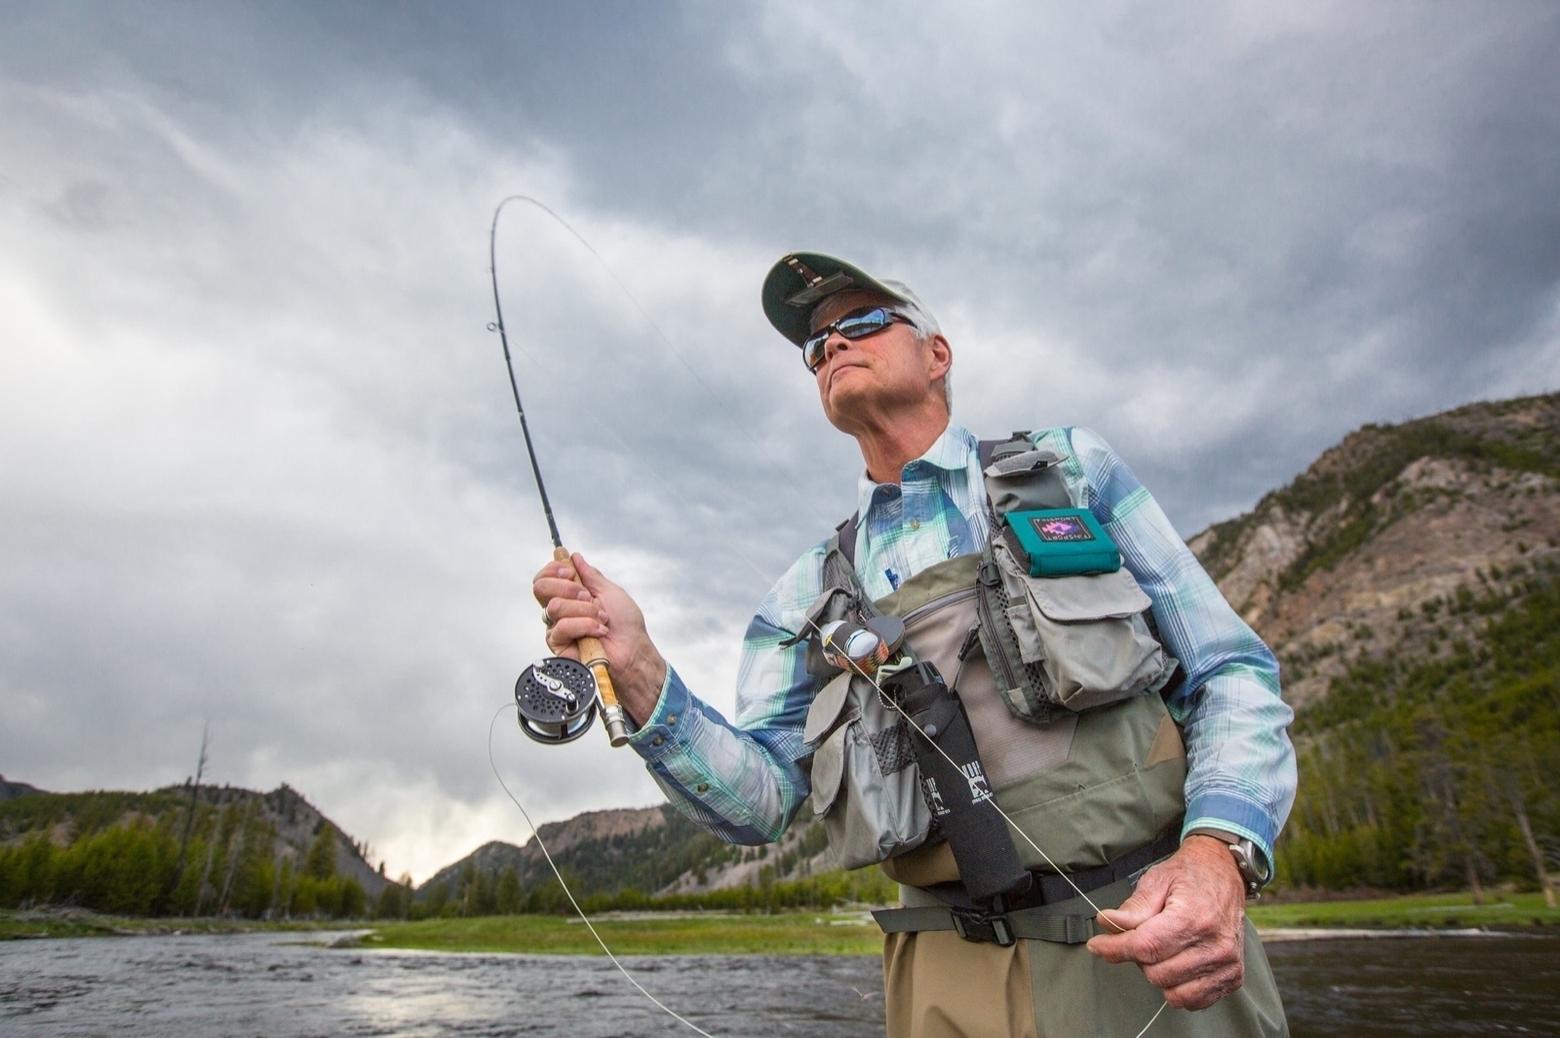 River protector and legendary fly fisherman Craig Mathews say conservation benefits communities, economies and personal lifestyles. It only makes sense that business people should act on their conscience and dedicate part of their profits to environmental protection. Photo courtesy NPS